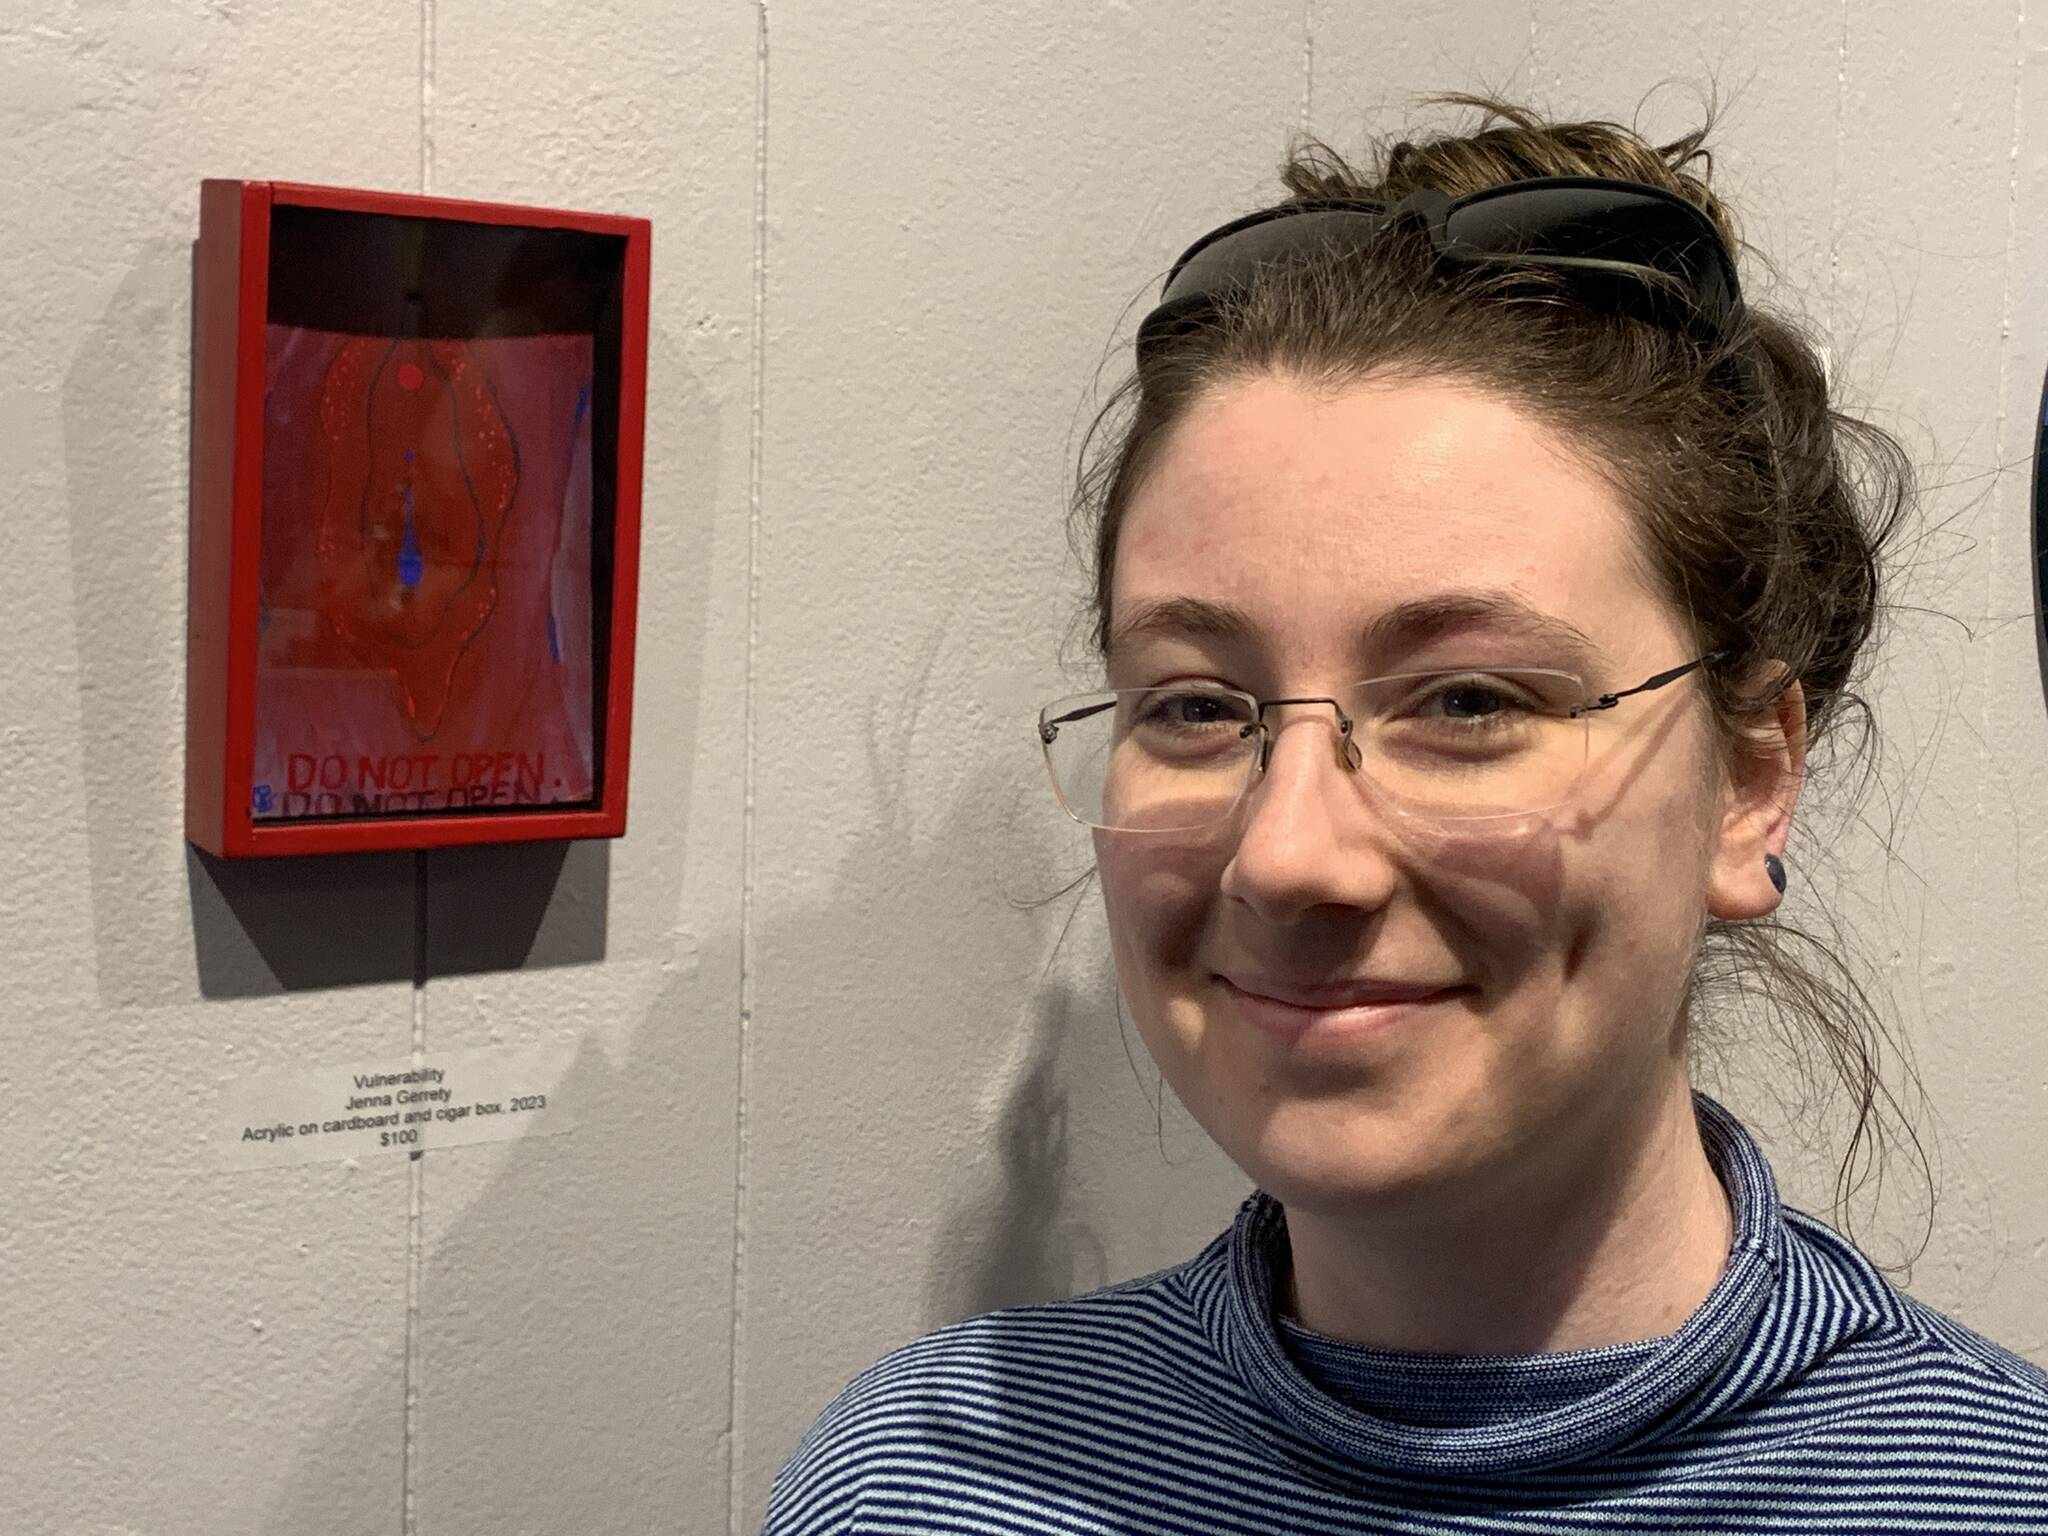 Photos by Christina Whiting/Homer News
Artist Jenna Gerrety poses with her piece “Vulnerability,” acrylic on cardboard and a cigar box, on display at Homer Council on the Arts through March as part of the “Bodily Autonomy” exhibit co-sponsored by Kachemak Bay Family Planning Clinic.